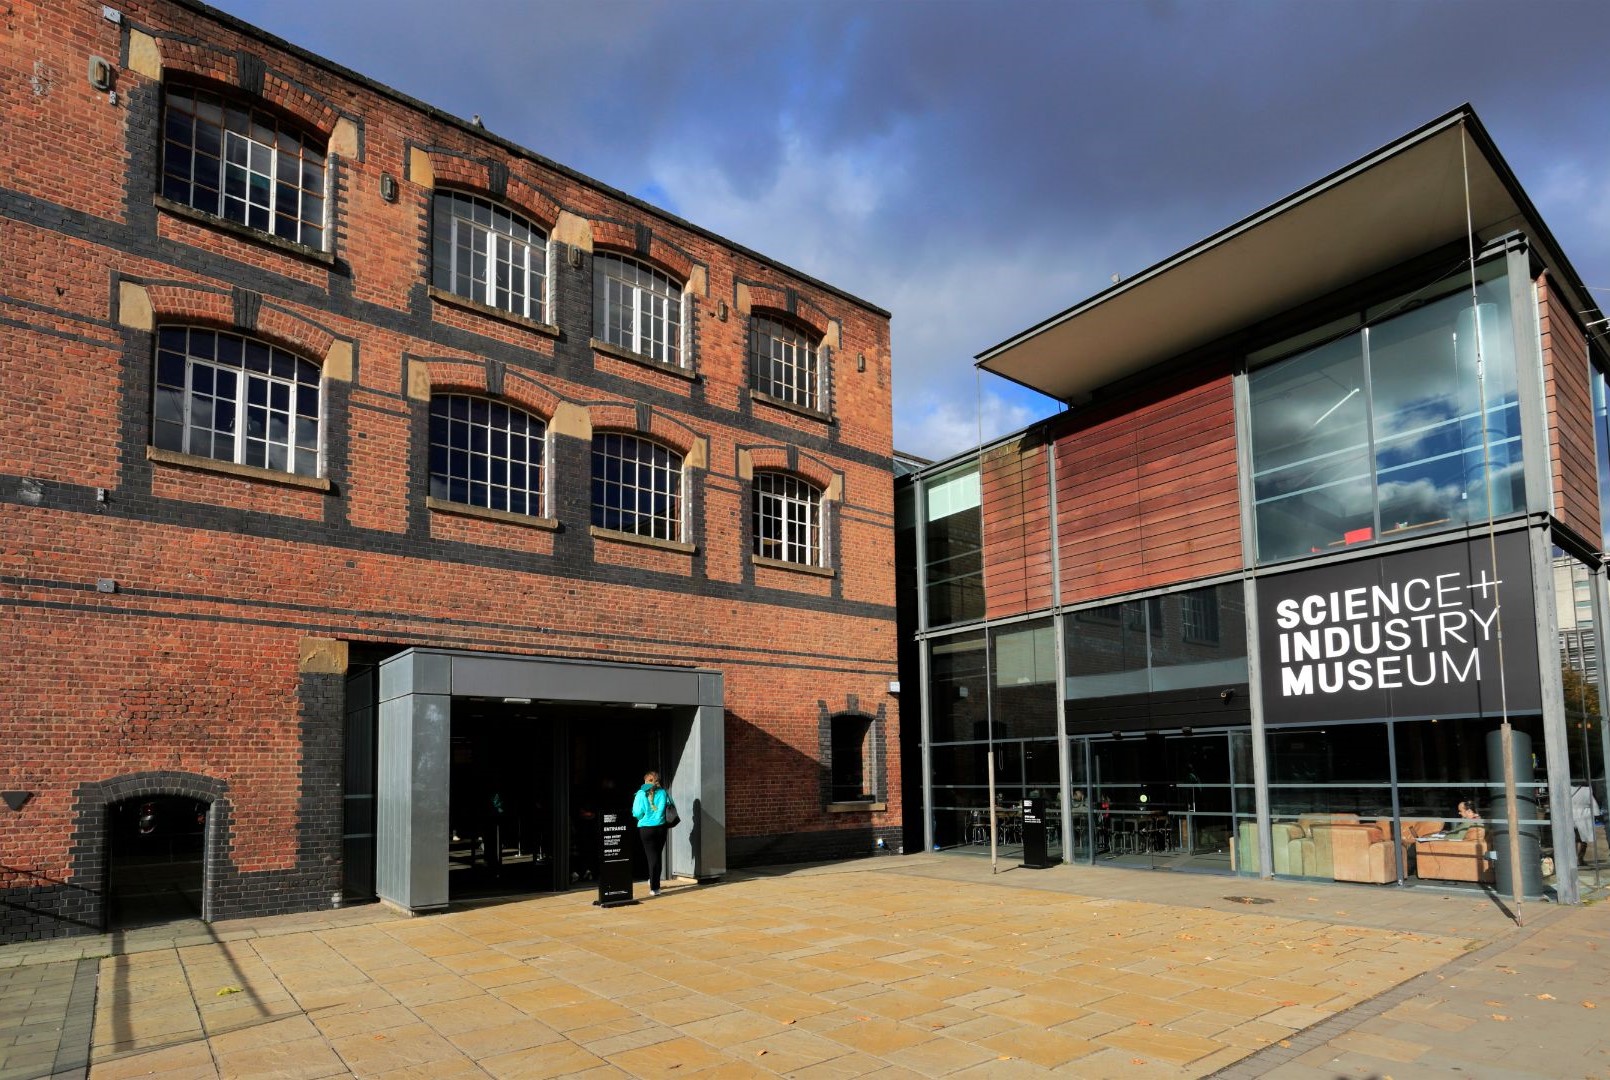 This museum is a tribute to Manchester's industrial legacy.